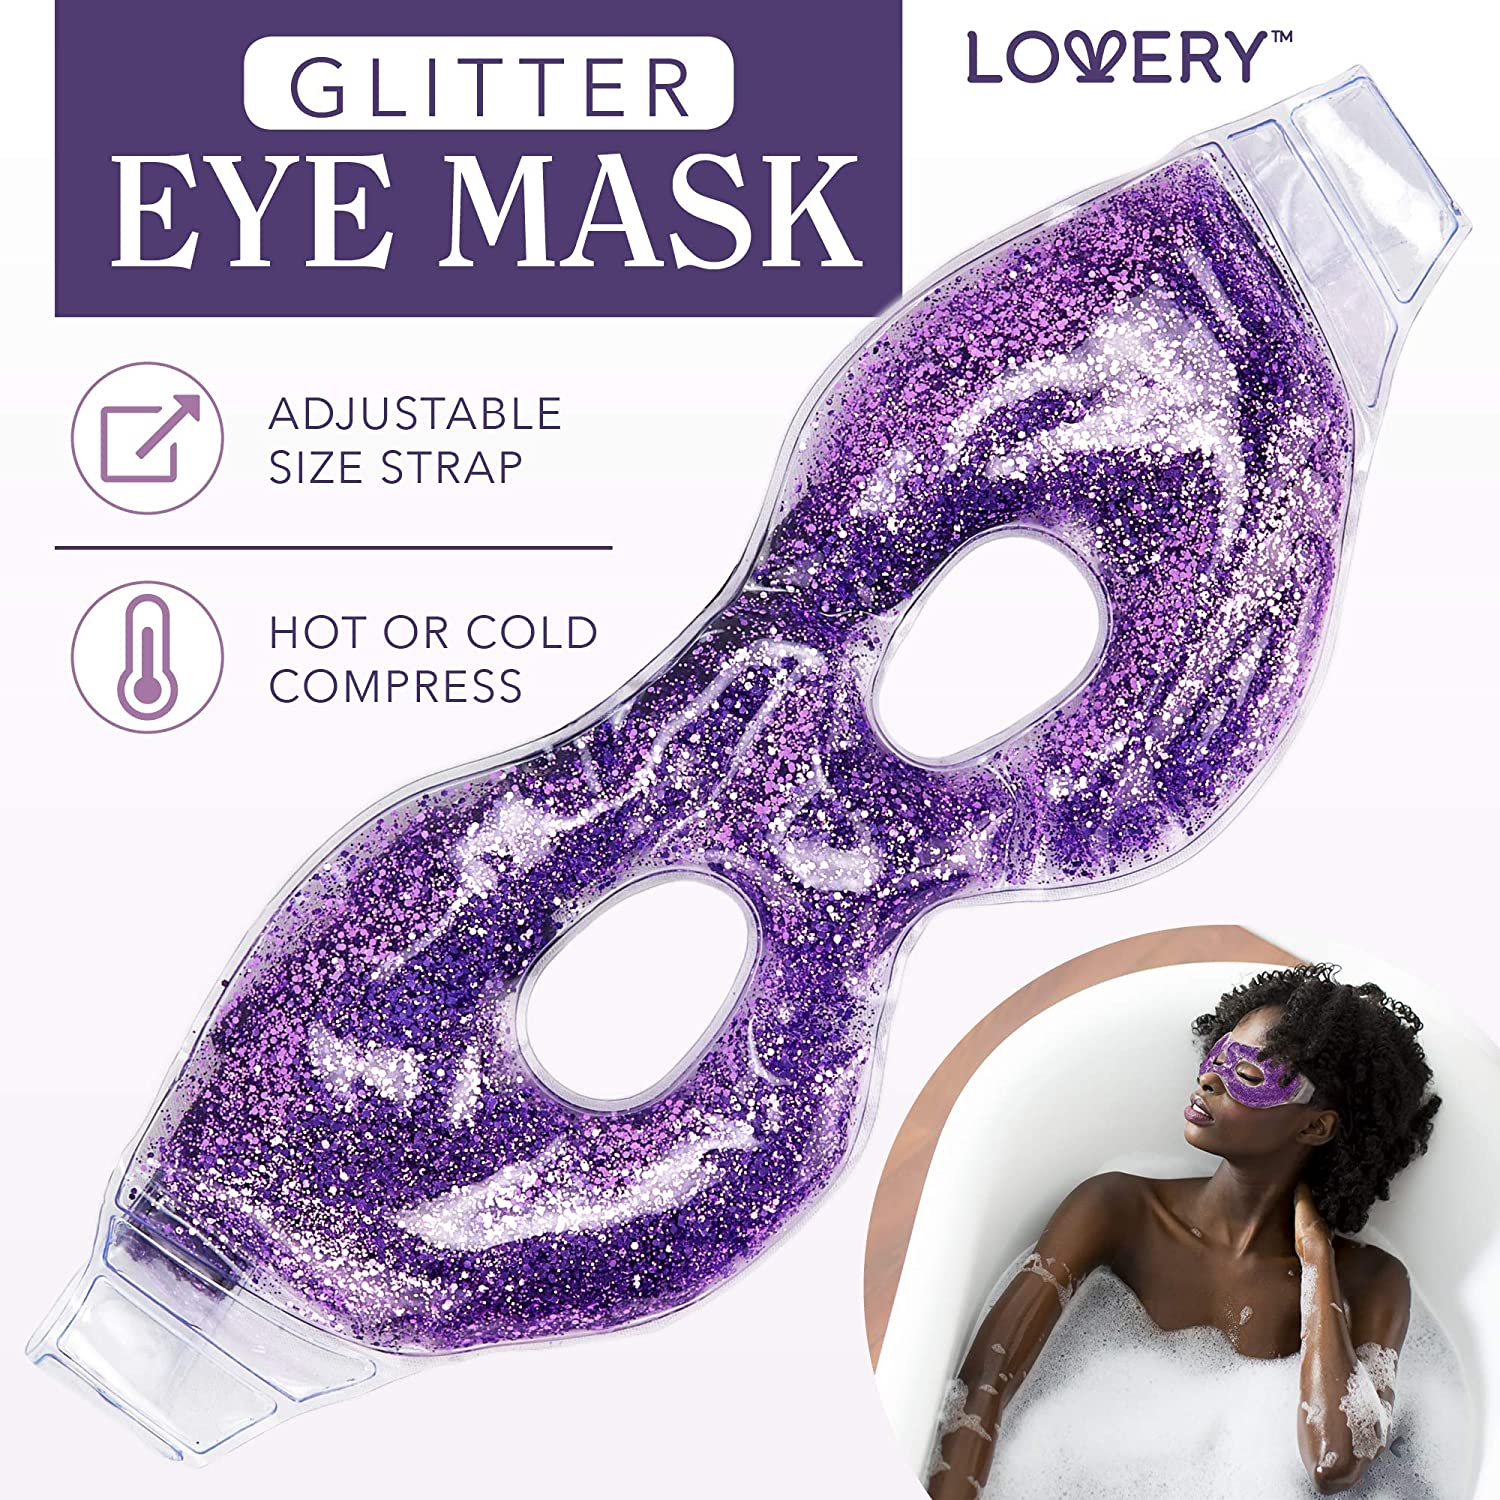 Lovery Glitter Eye Mask, elegantly designed relaxation accessory in sparkling purple, Luxurious Purple & Silver Design, Soft & Fresh Lavender Aroma, Adjustable Size Strap for tailored comfort, Hot or Cold Compress feature for therapeutic use, Decorative Glitter Detailing for a touch of luxury, Essential for a Tranquil Spa-Like Experience, Paraben-Free and Safe for Skin, Cruelty-Free Relaxation Product, Showcased with a serene image of a woman illustrating its calming effects